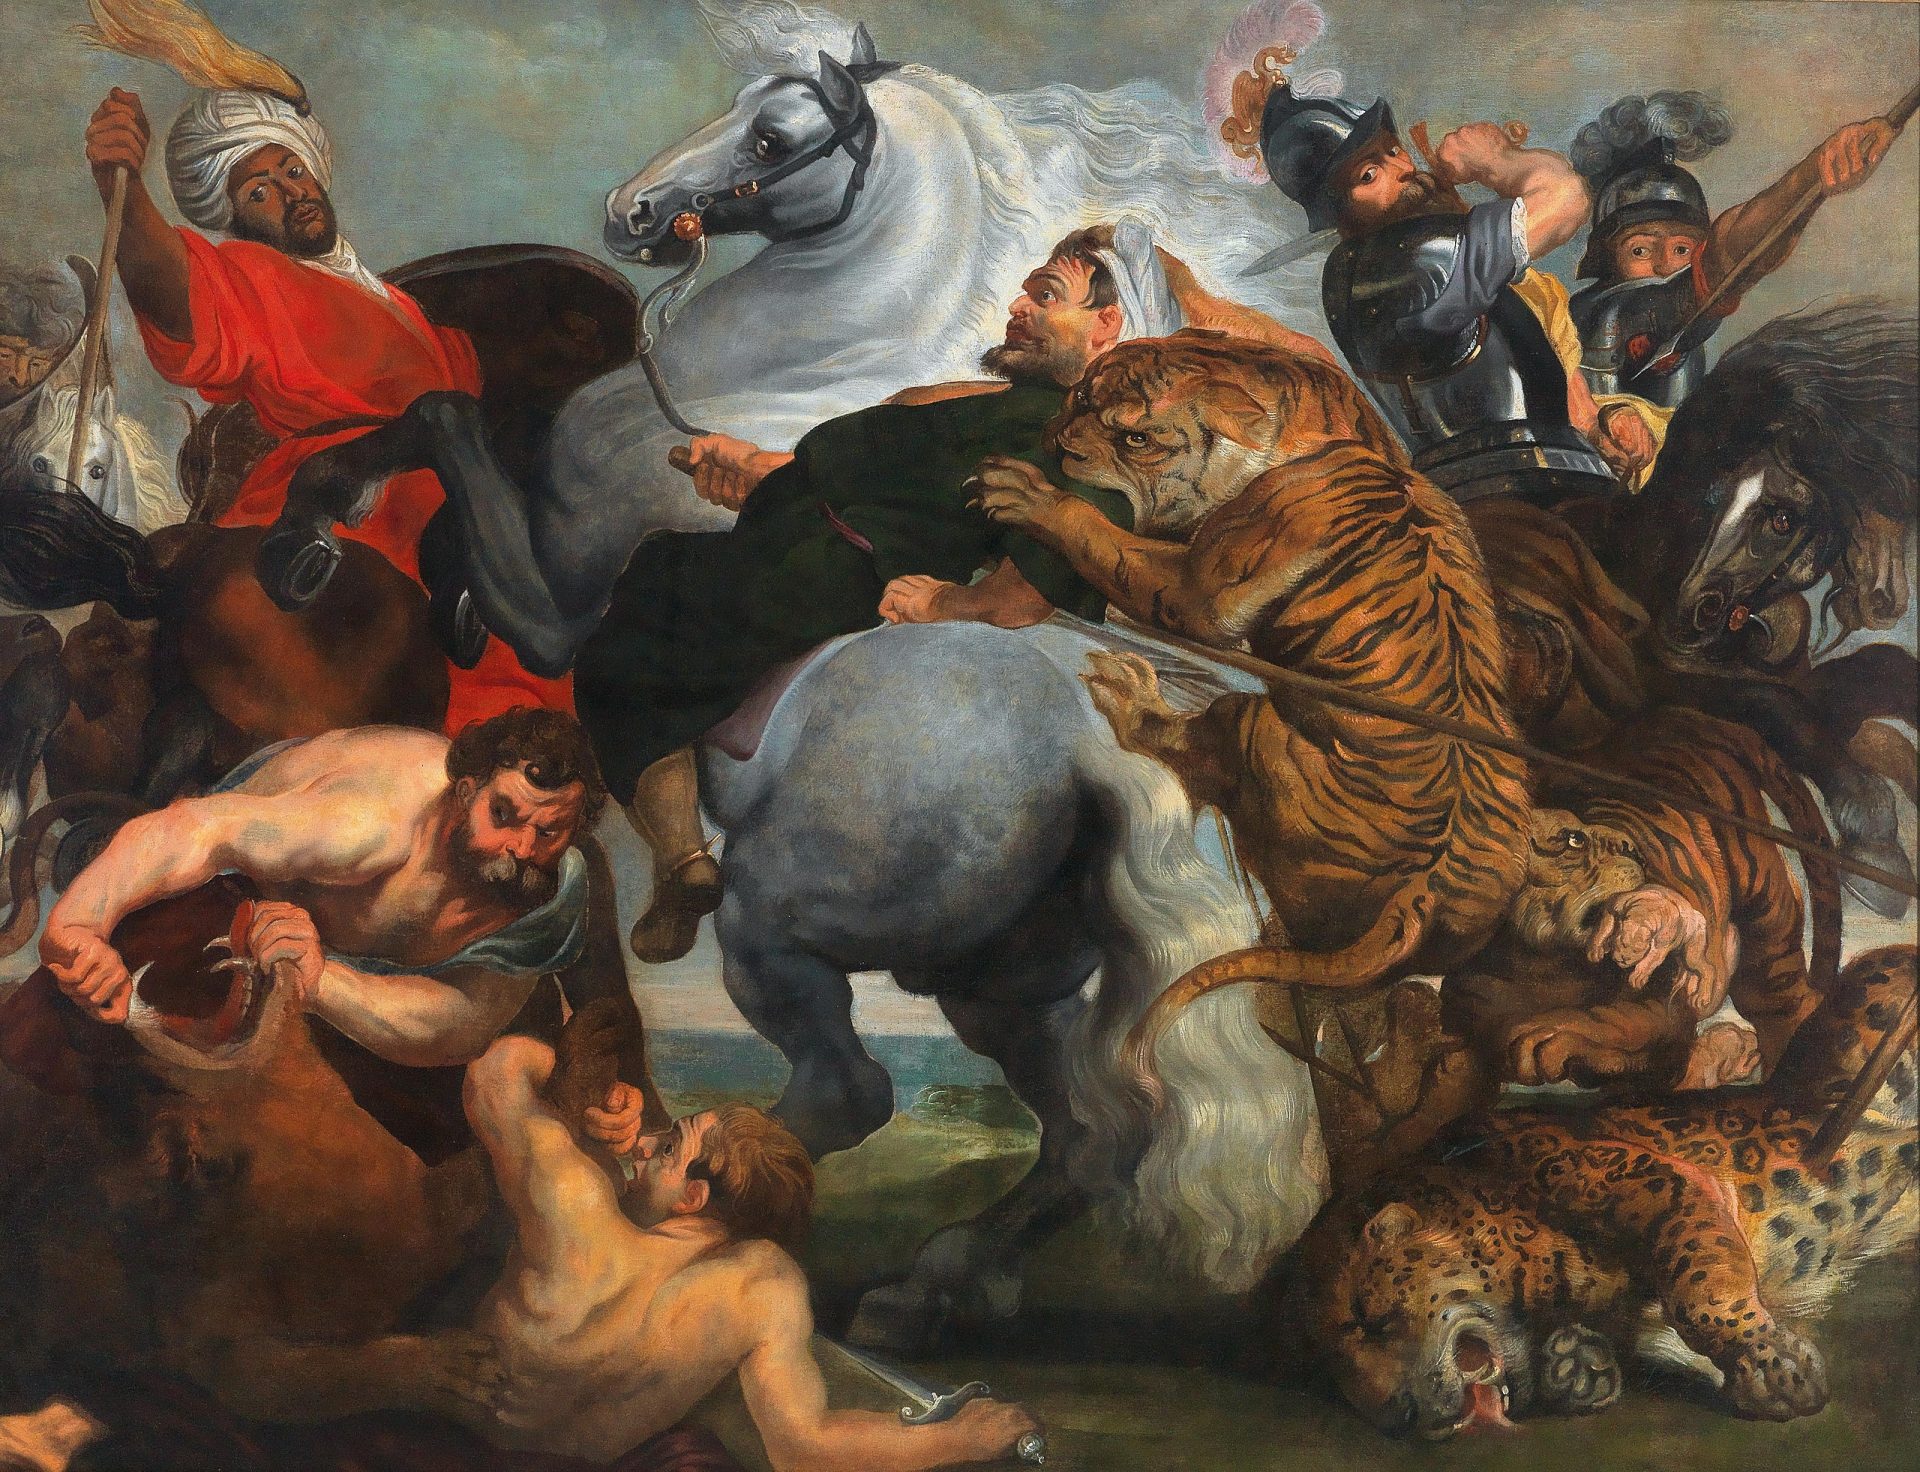 A painting in the baroque style featuring several men fighting a lion, tiger and leopard, with swords , spears and their bare hands.